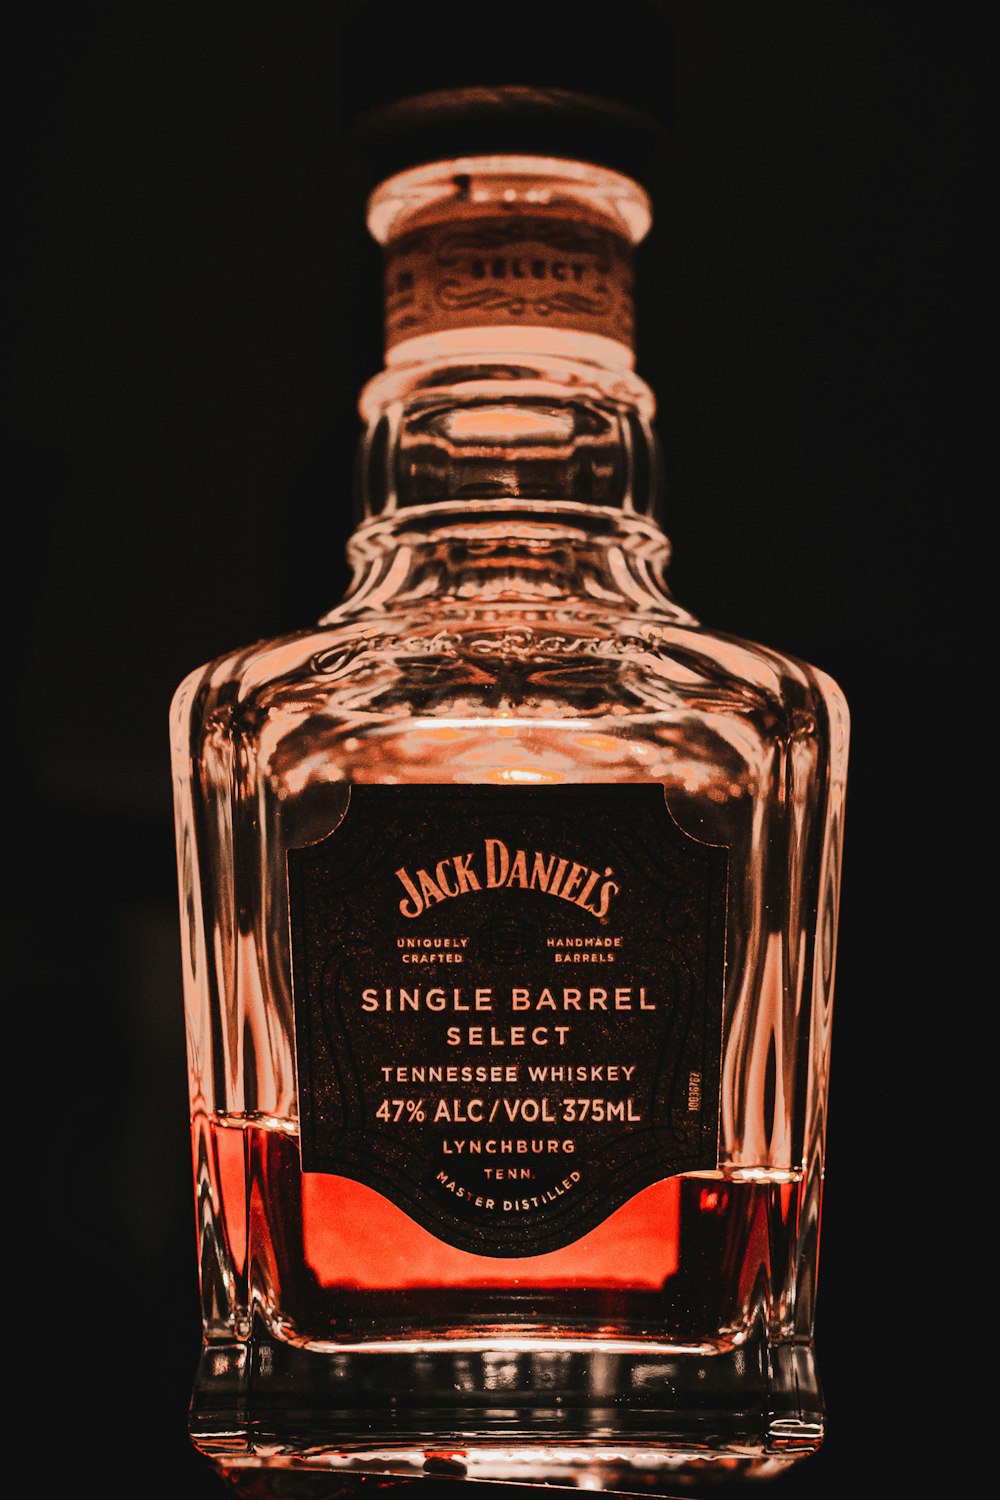 a bottle of whiskey with Jack Daniel's in the background